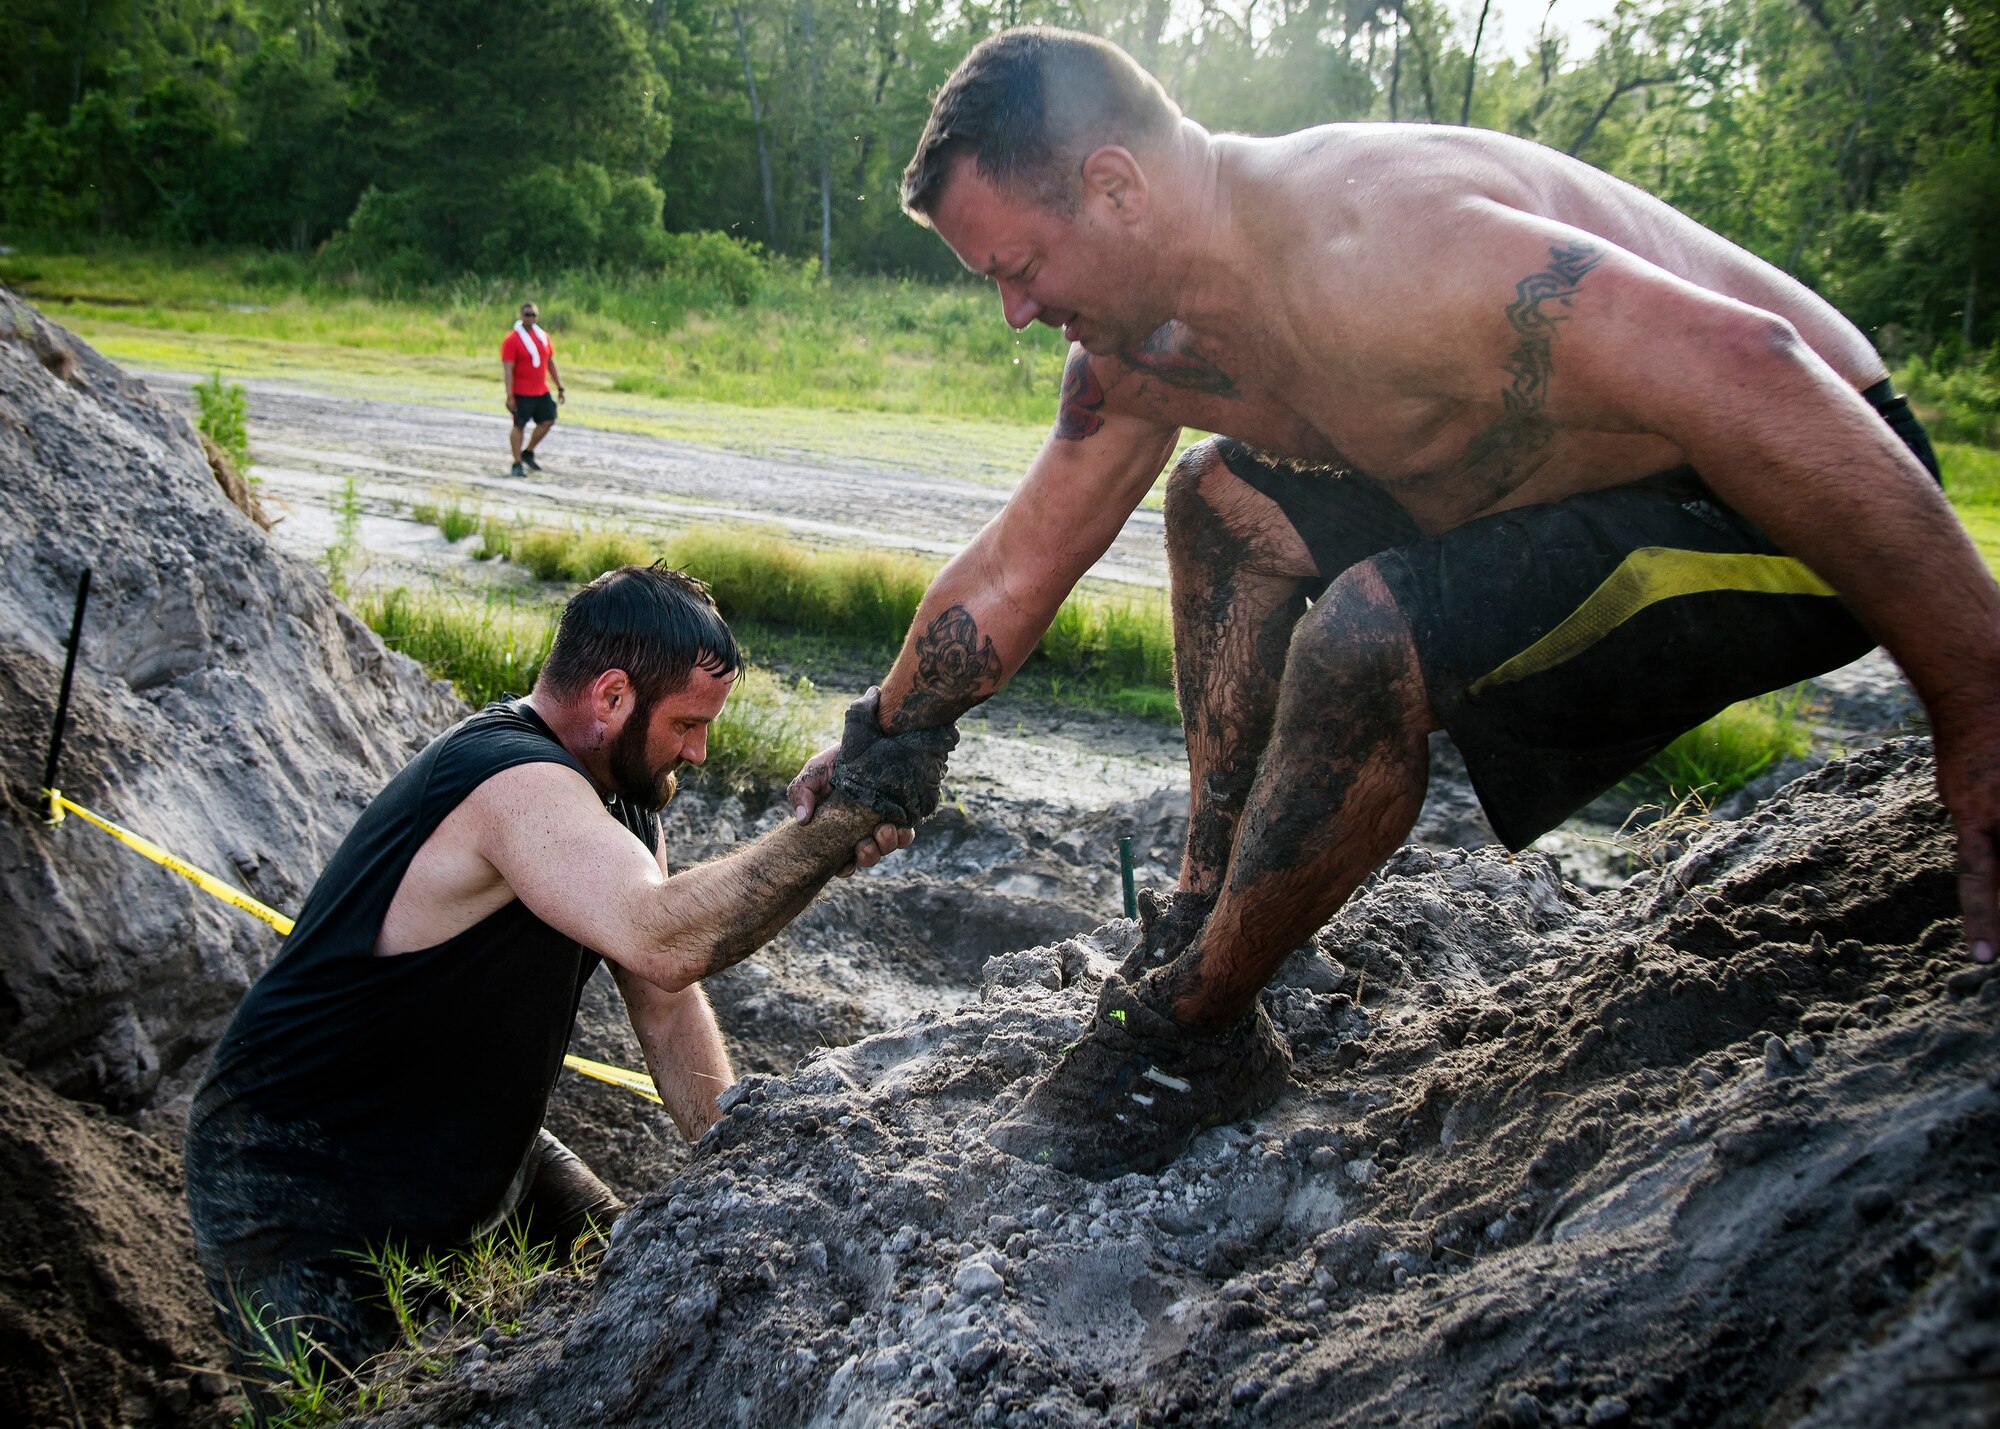 Moody Mud Run participants climp up an incline, May 4, 2019, in Ray City, Ga. The sixth annual Mud Run had approximately 850 participants who had to overcome a series of obstacles on the 4 and 5-mile courses. The 32-obstacle course gave Airmen, families and the local community an opportunity to build camaraderie and teamwork skills. (U.S. Air Force photo by Airman 1st Class Eugene Oliver)